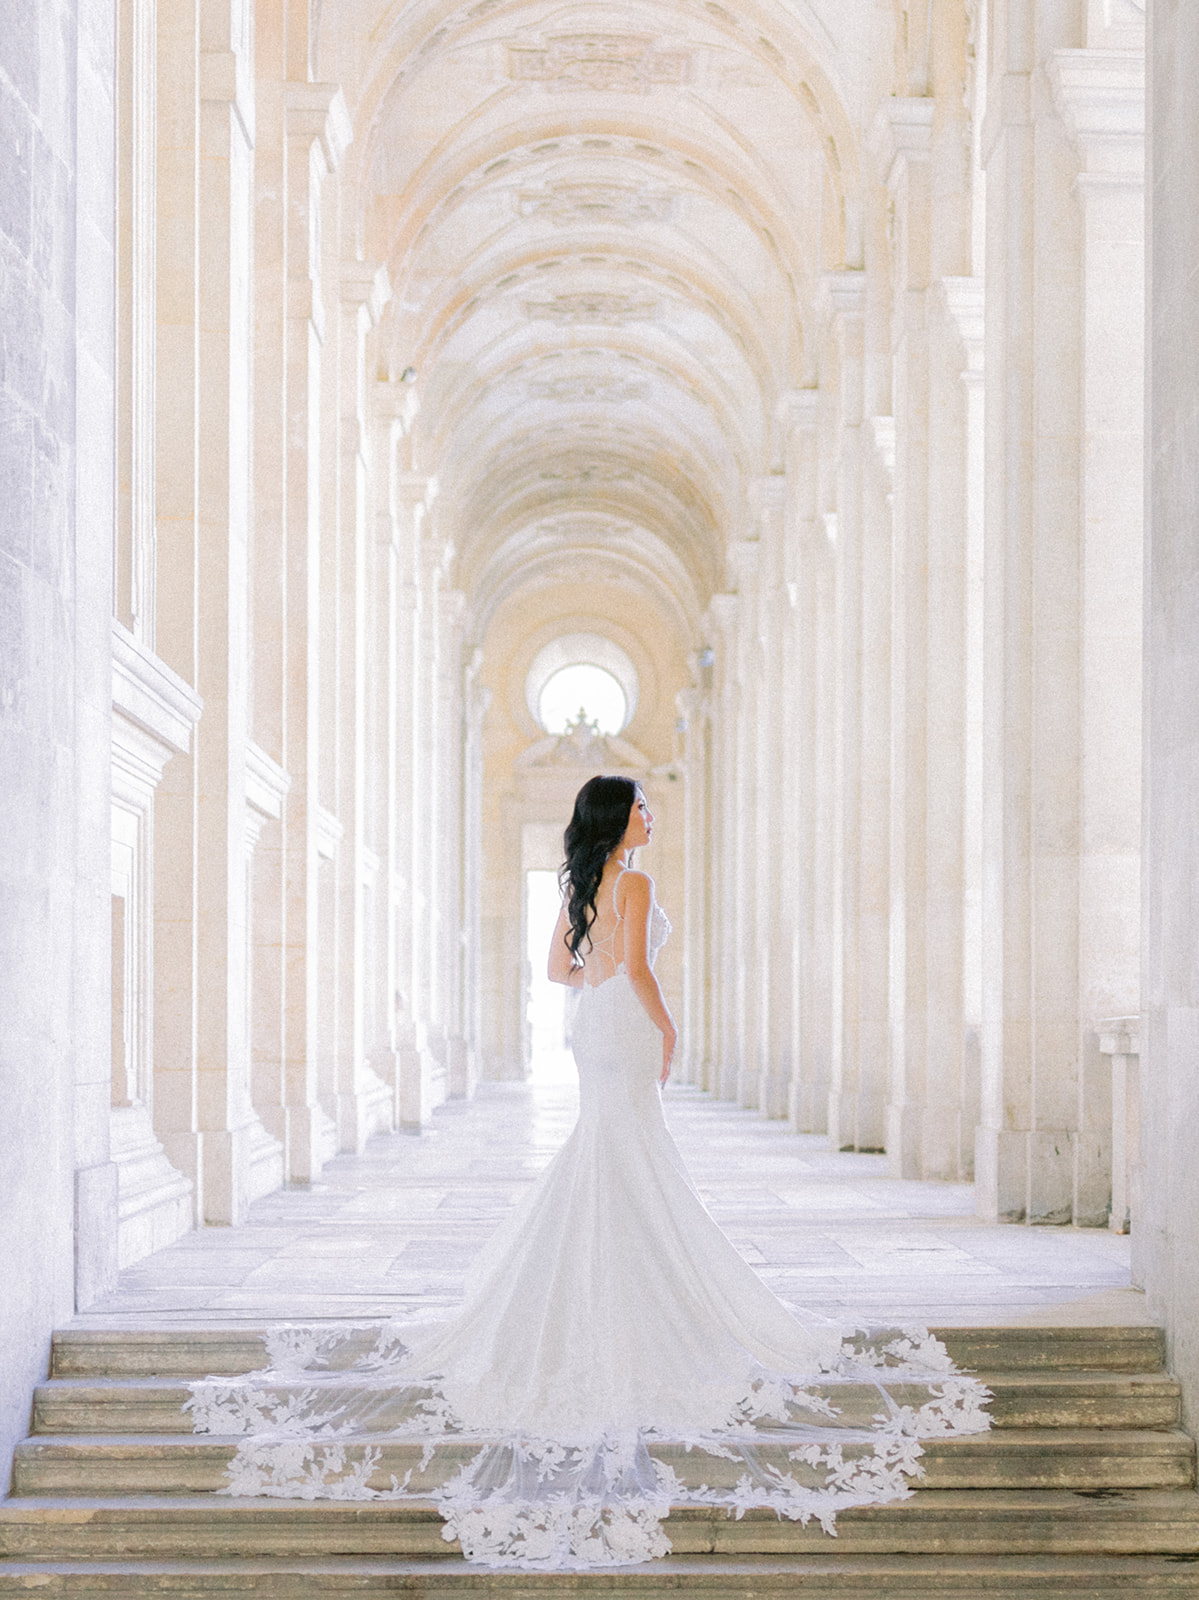 Bride posing on the stairs of the Louvre Museum